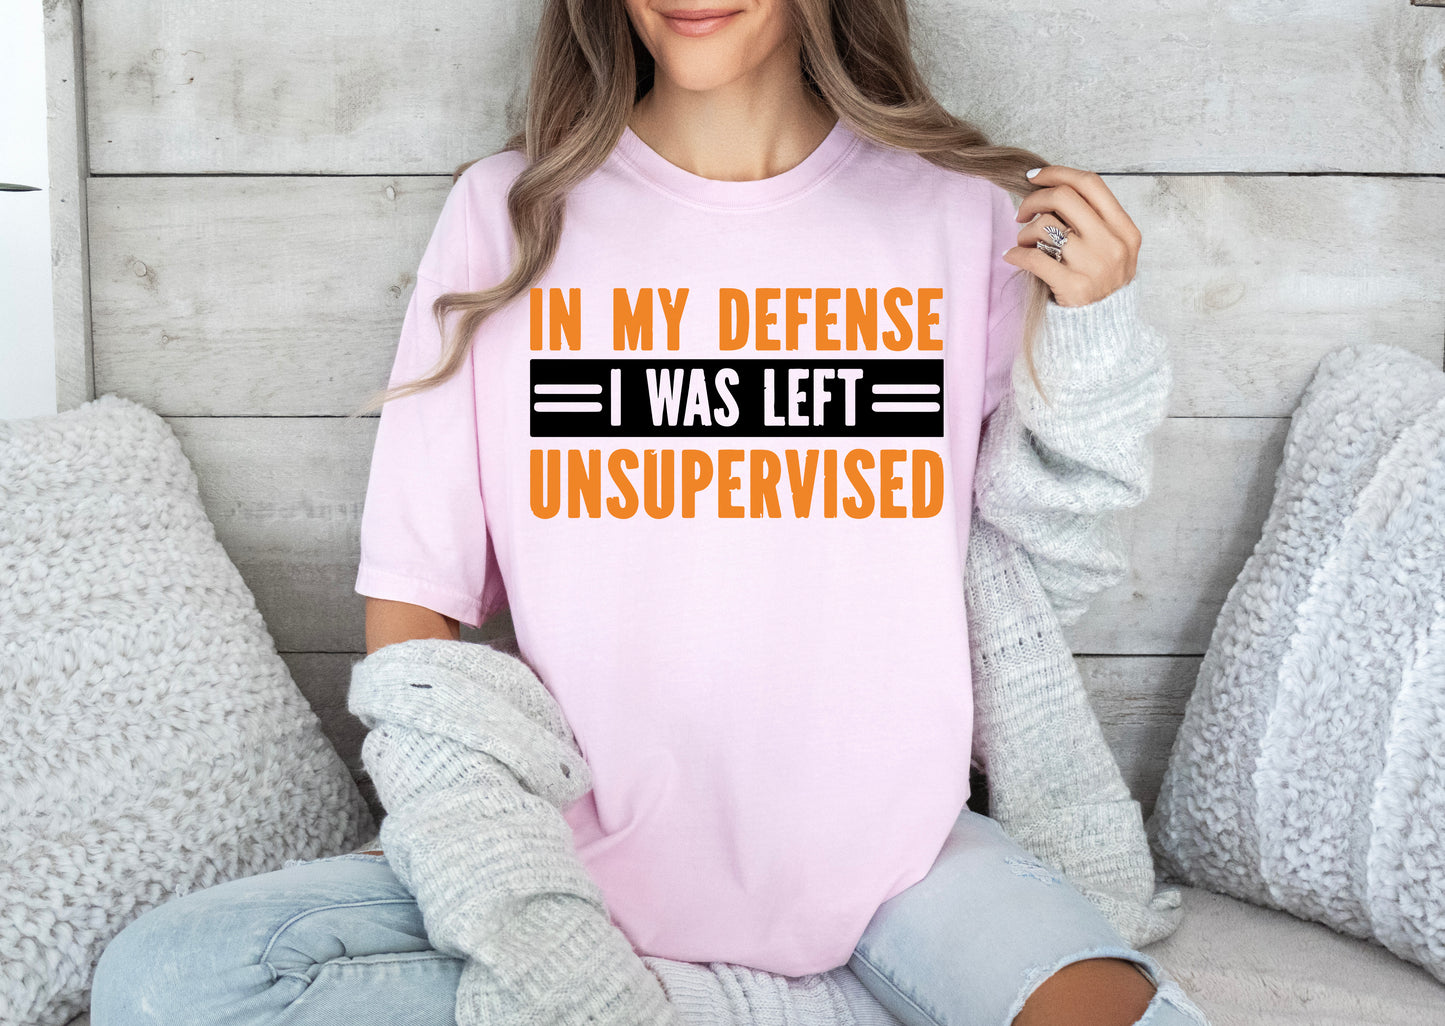 In My Defense I Was Left Unsupervised Shirt, Comfort Color T-Shirts, Funny Shirt-newamarketing